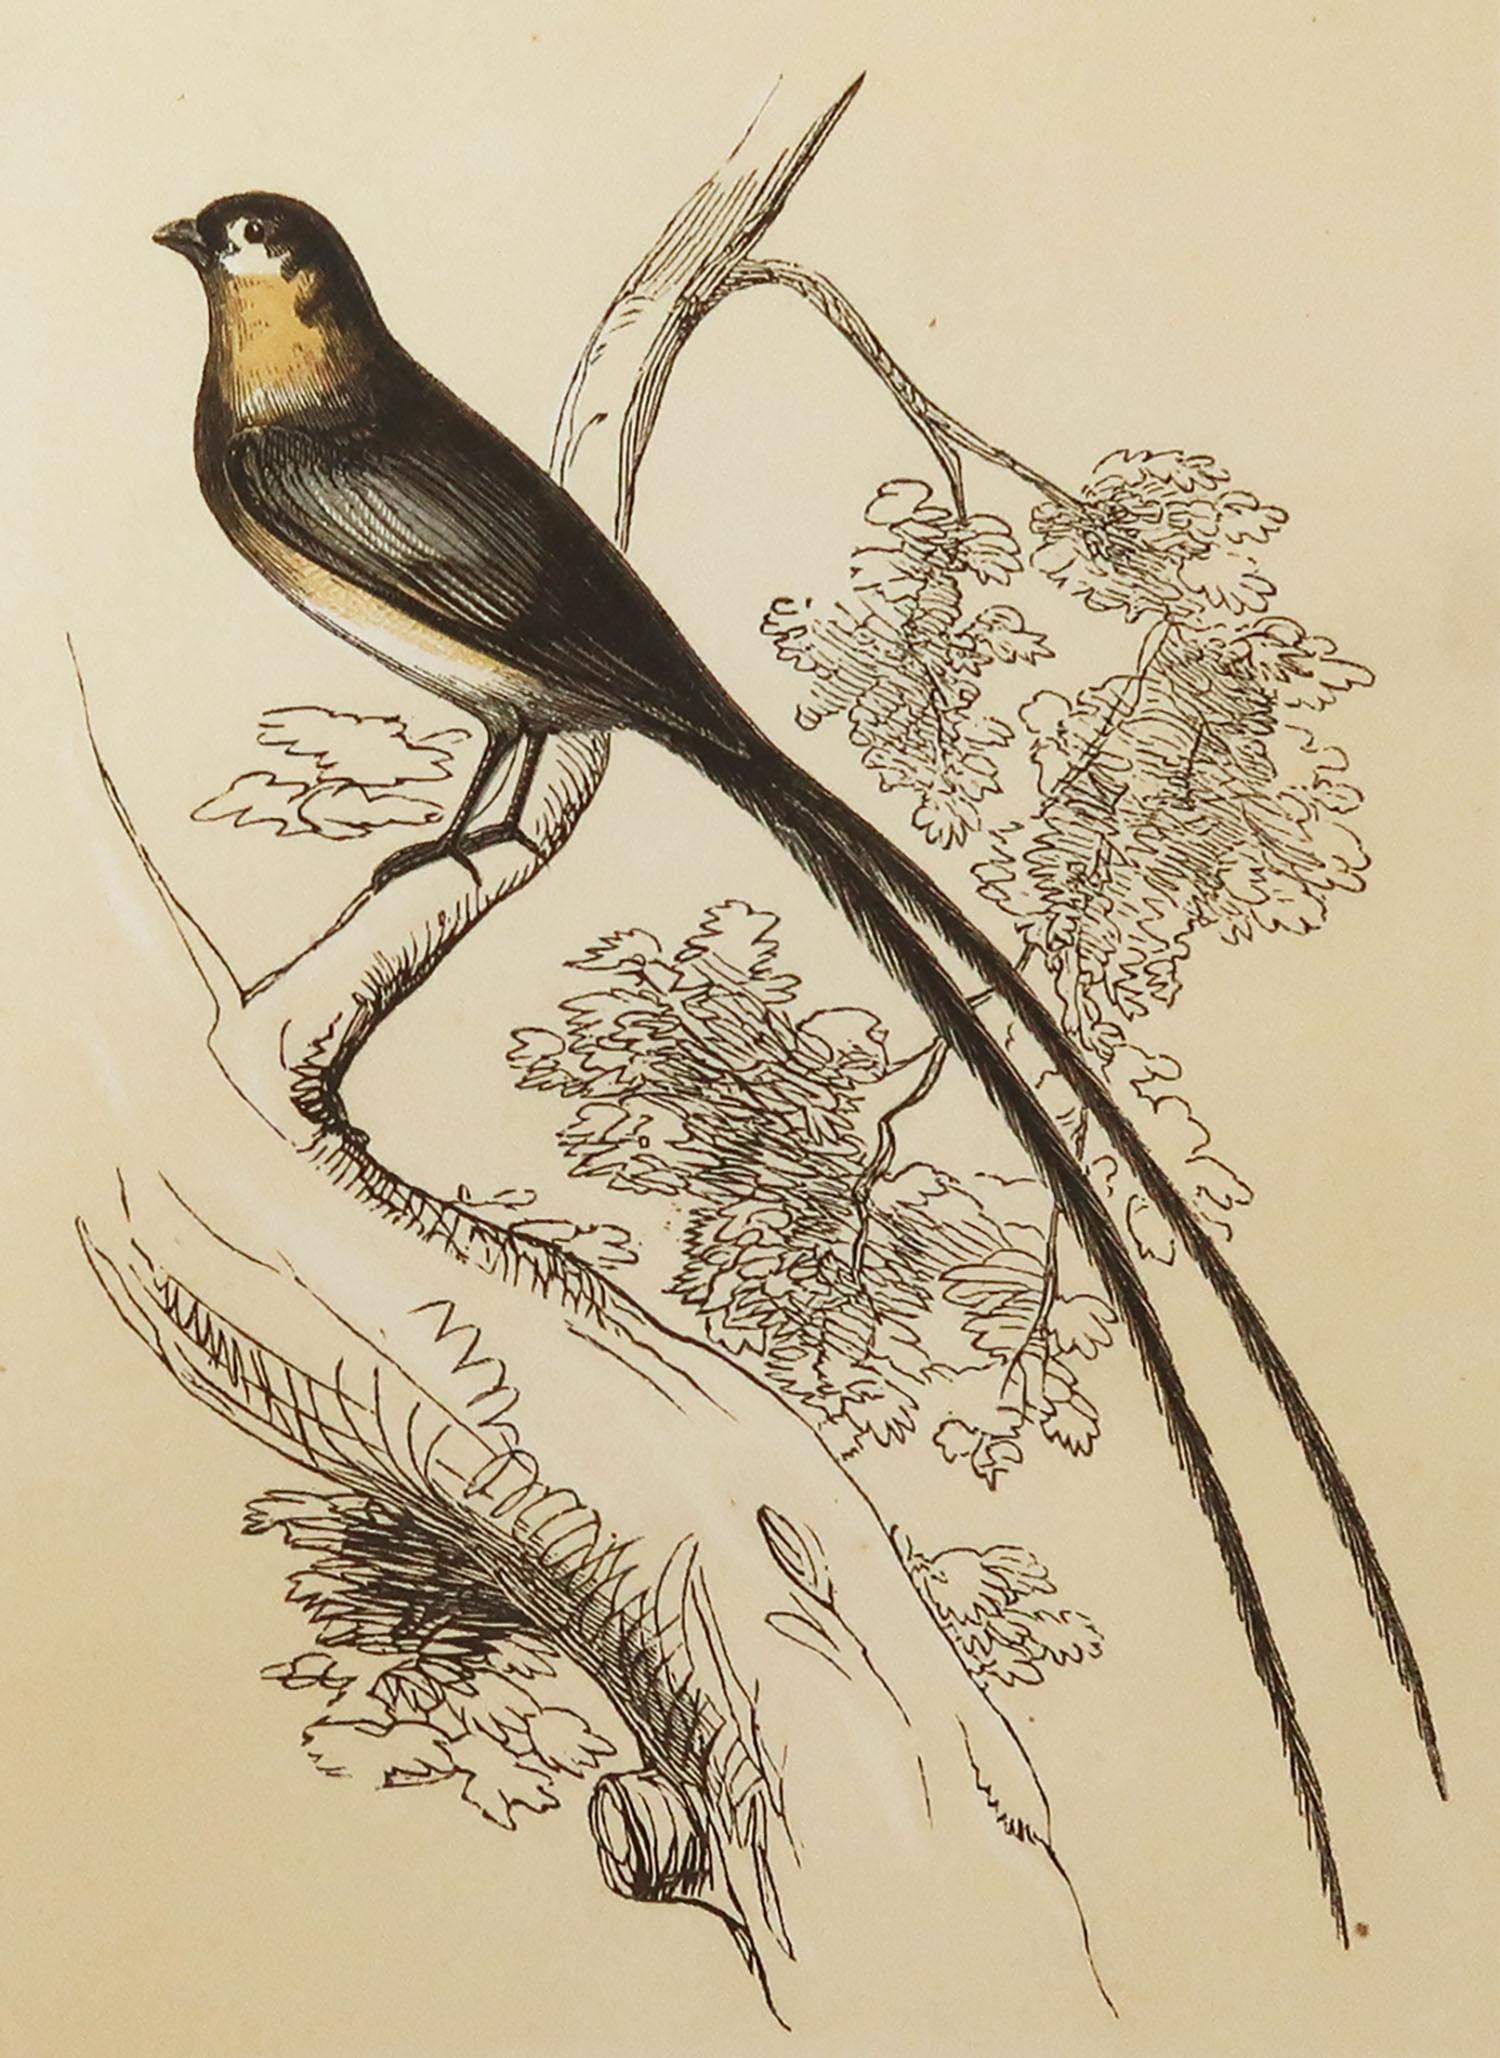 Great image of a whidah finch

Unframed. It gives you the option of perhaps making a set up using your own choice of frames

Lithograph with original color.

Published by Tallis circa 1850

Crudely inscribed title has been erased at the bottom of